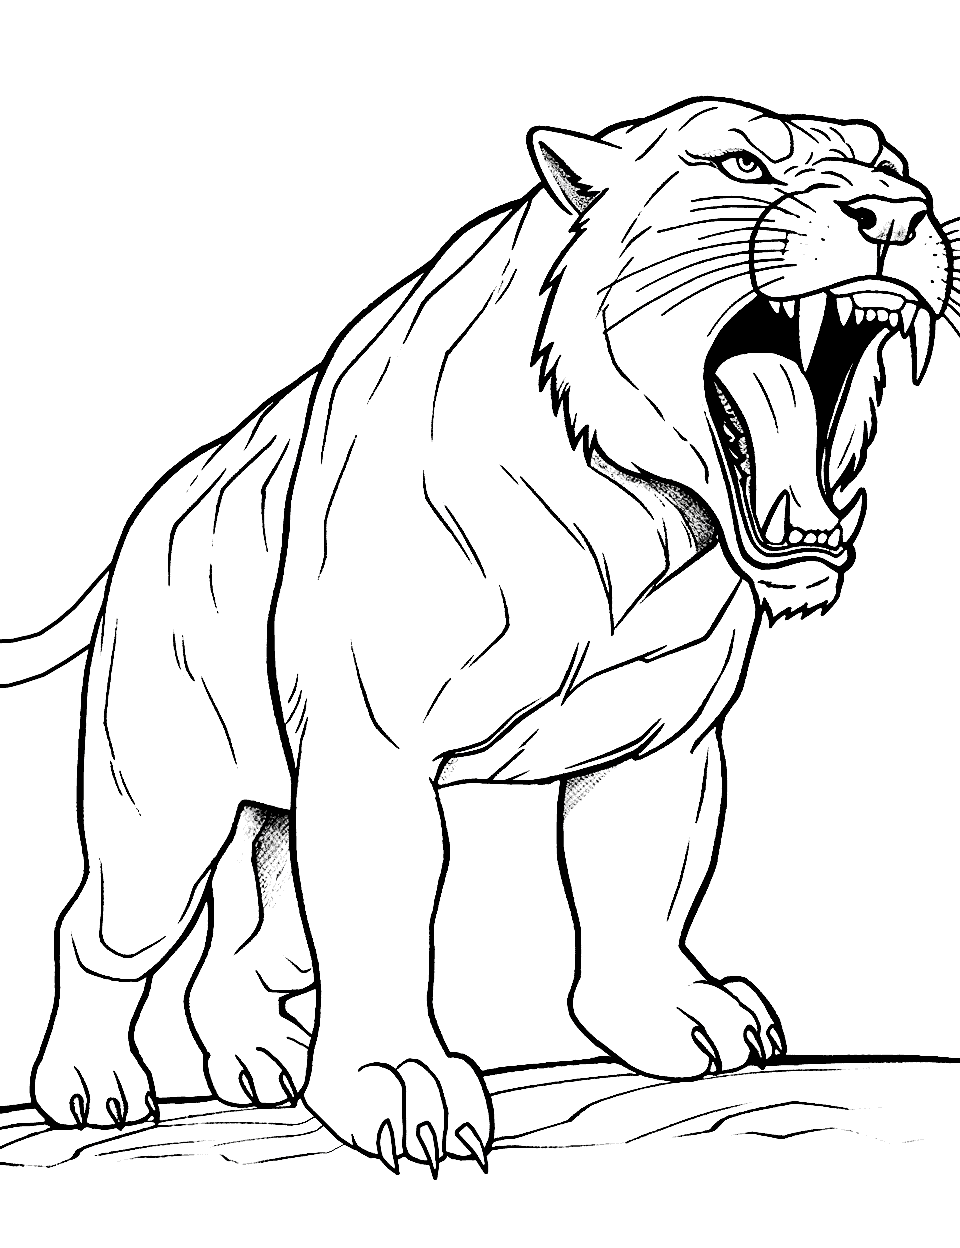 Saber Tooth Tiger of the Past Coloring Page - The extinct saber-toothed tiger looking powerful with its huge teeth.